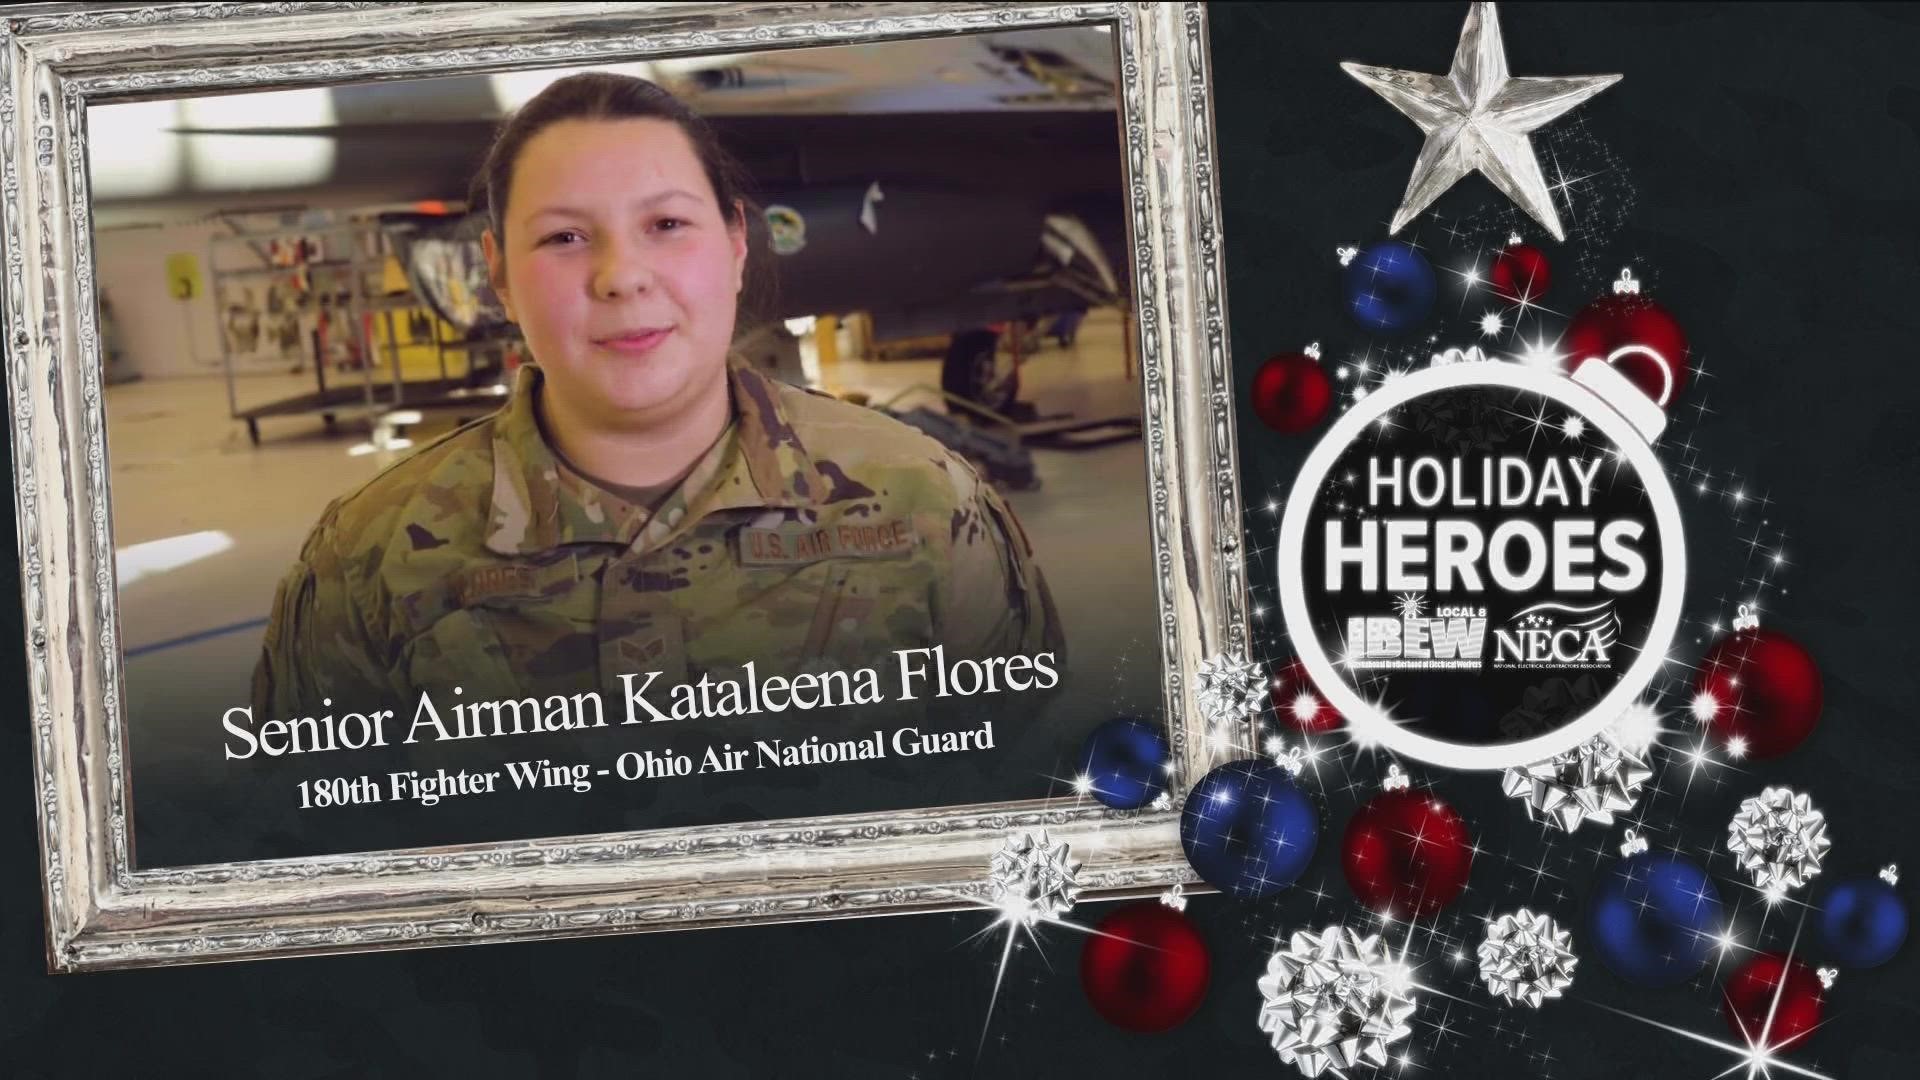 WTOL 11 continues to honor Holiday Heroes with a message from Senior Airman Kataleena Flores of the Ohio Air National Guard's 180th Fighter Wing.